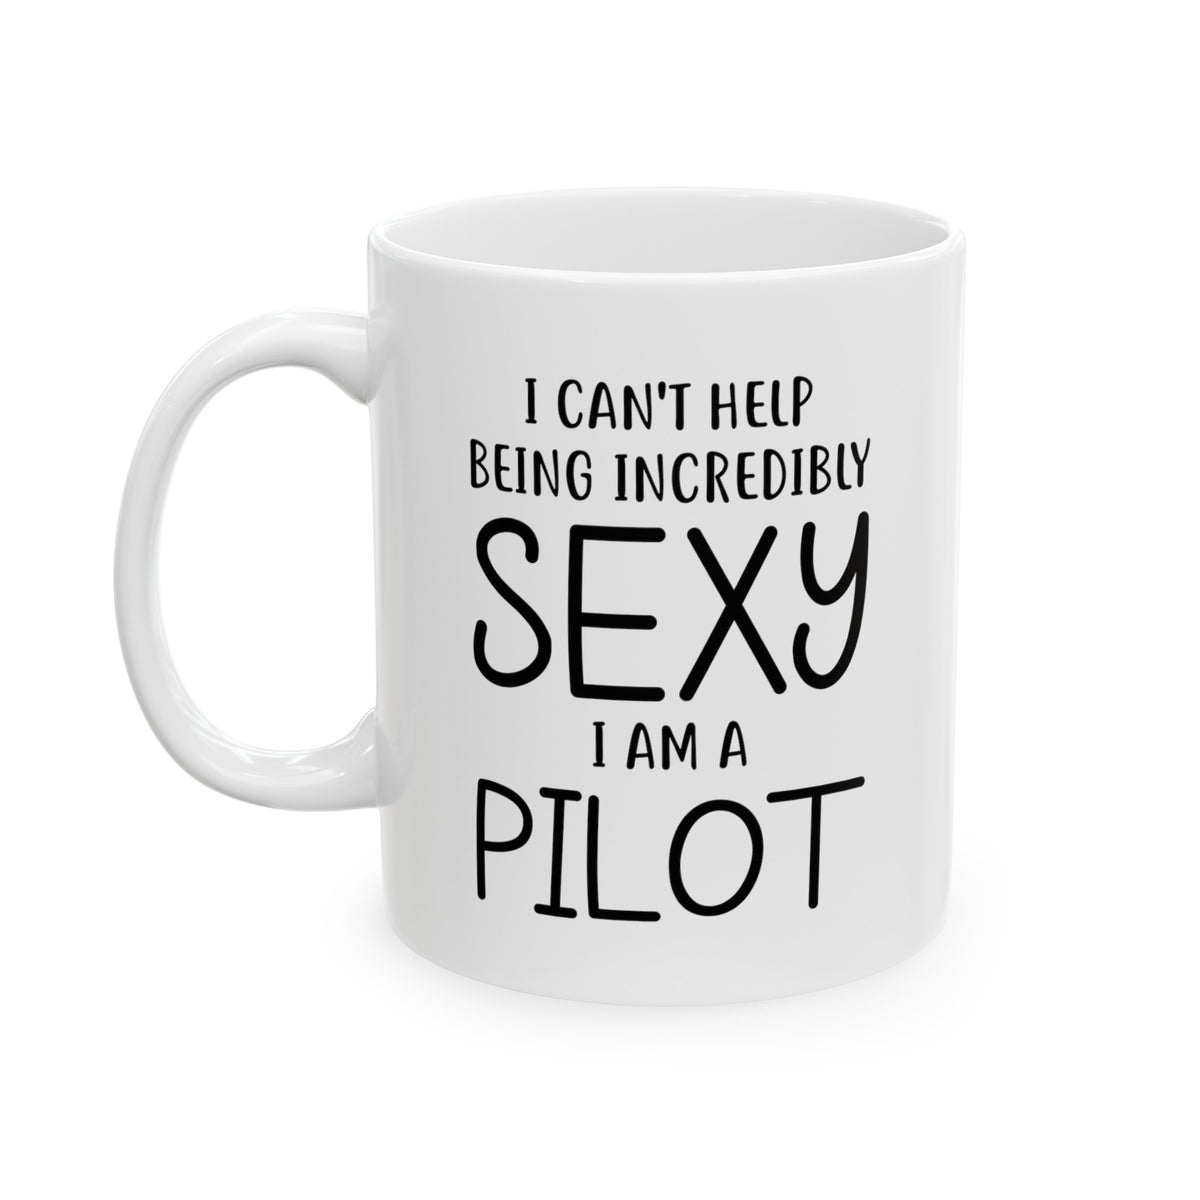 Funny Pilot Gifts 11oz Coffee Mug - I am a Sexy Pilot - Best Inspirational Gifts and Sarcasm